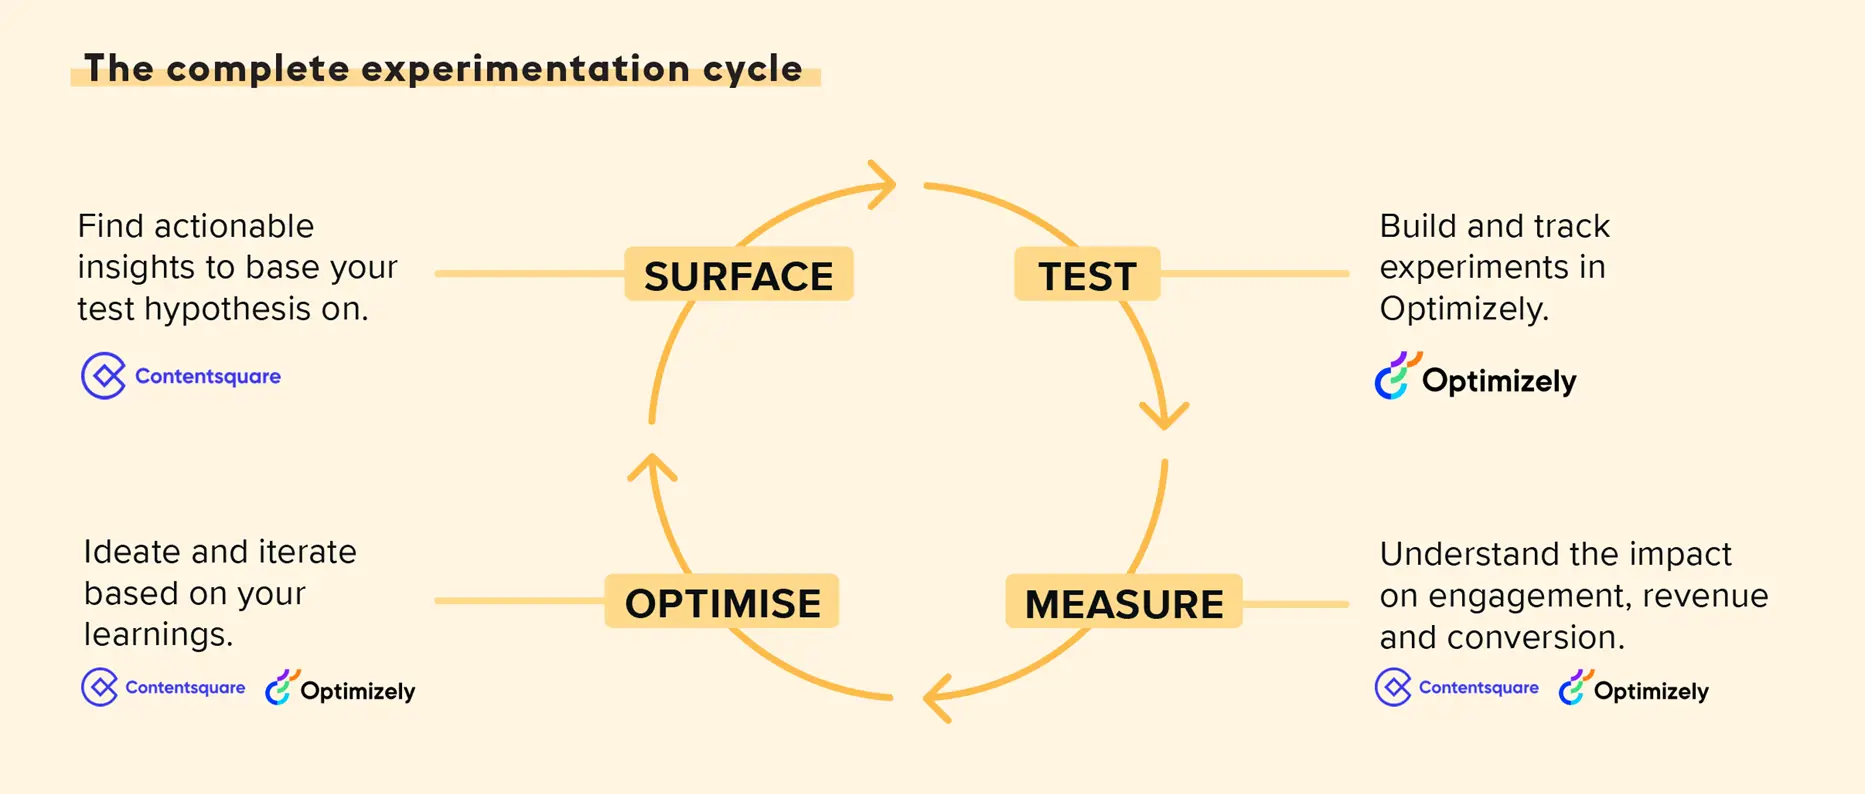 The Optimizely Contentsquare work lifecycle illustrated